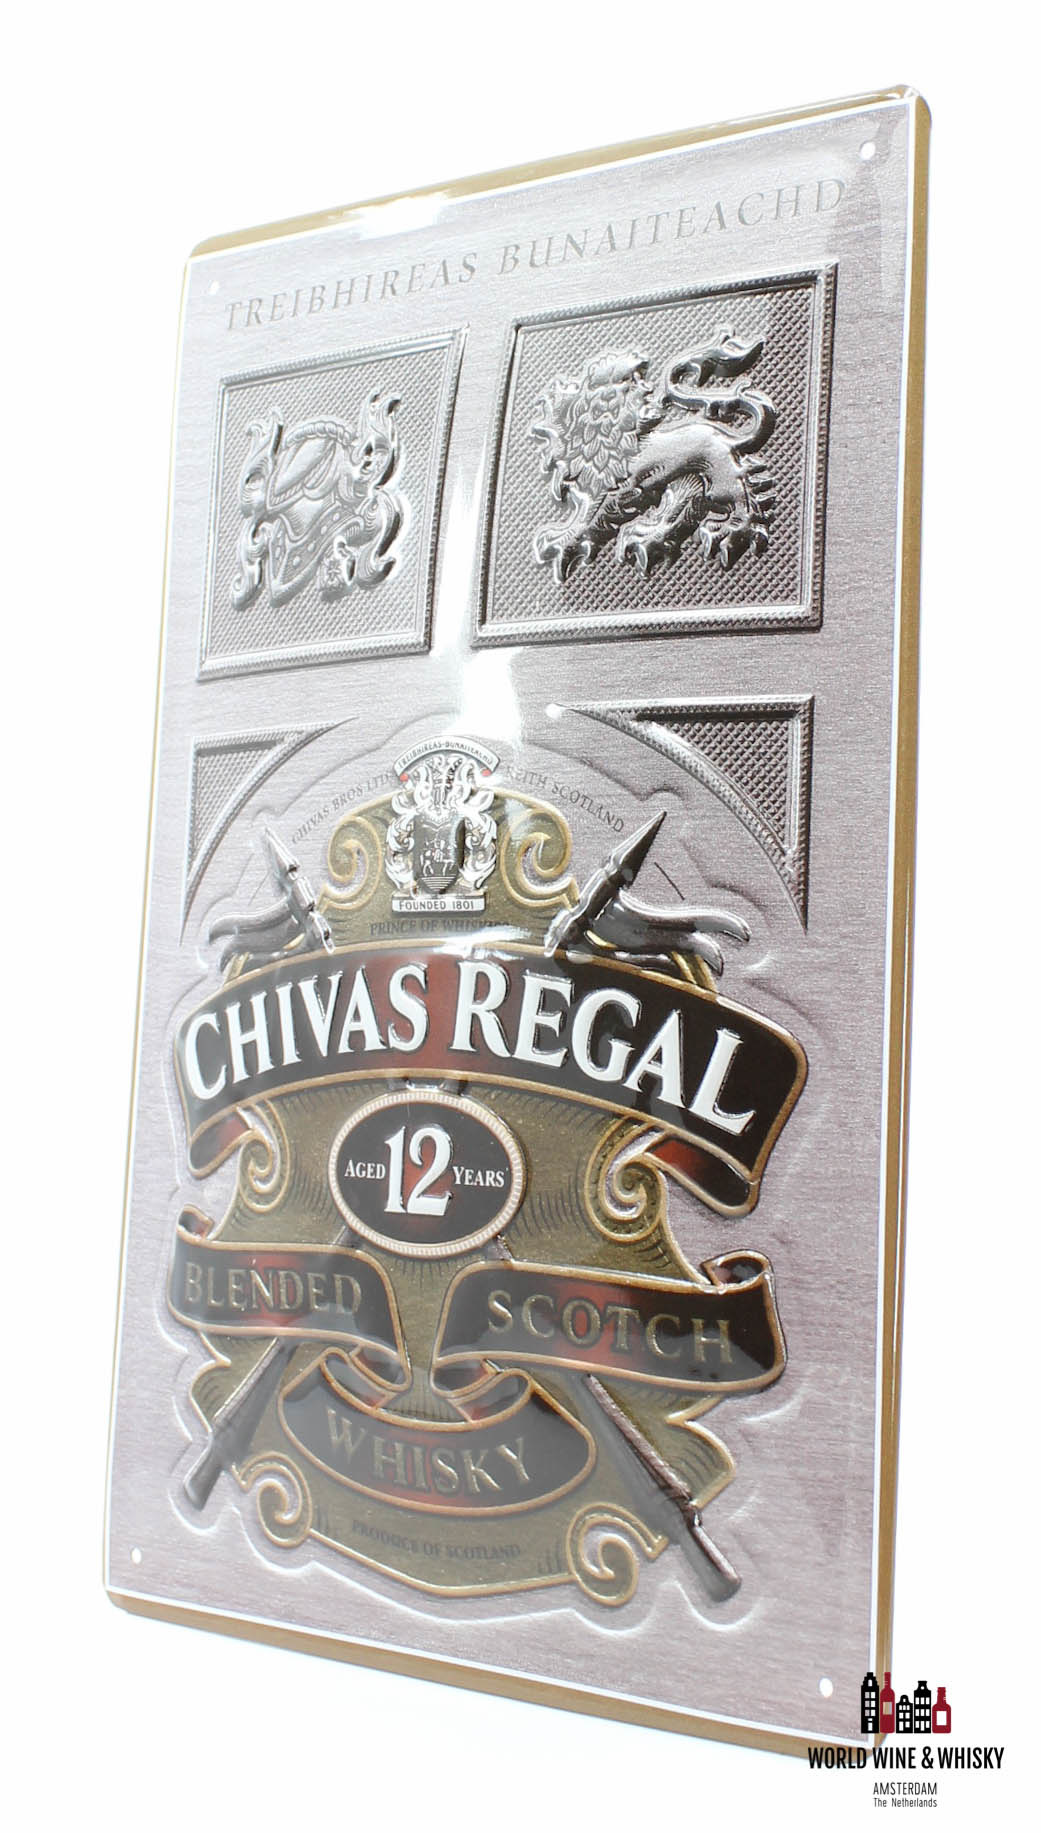 Chivas Regal Iron Chivas Regal 12 Years Old Billboard Plate Sign - Blended Scotch Whisky